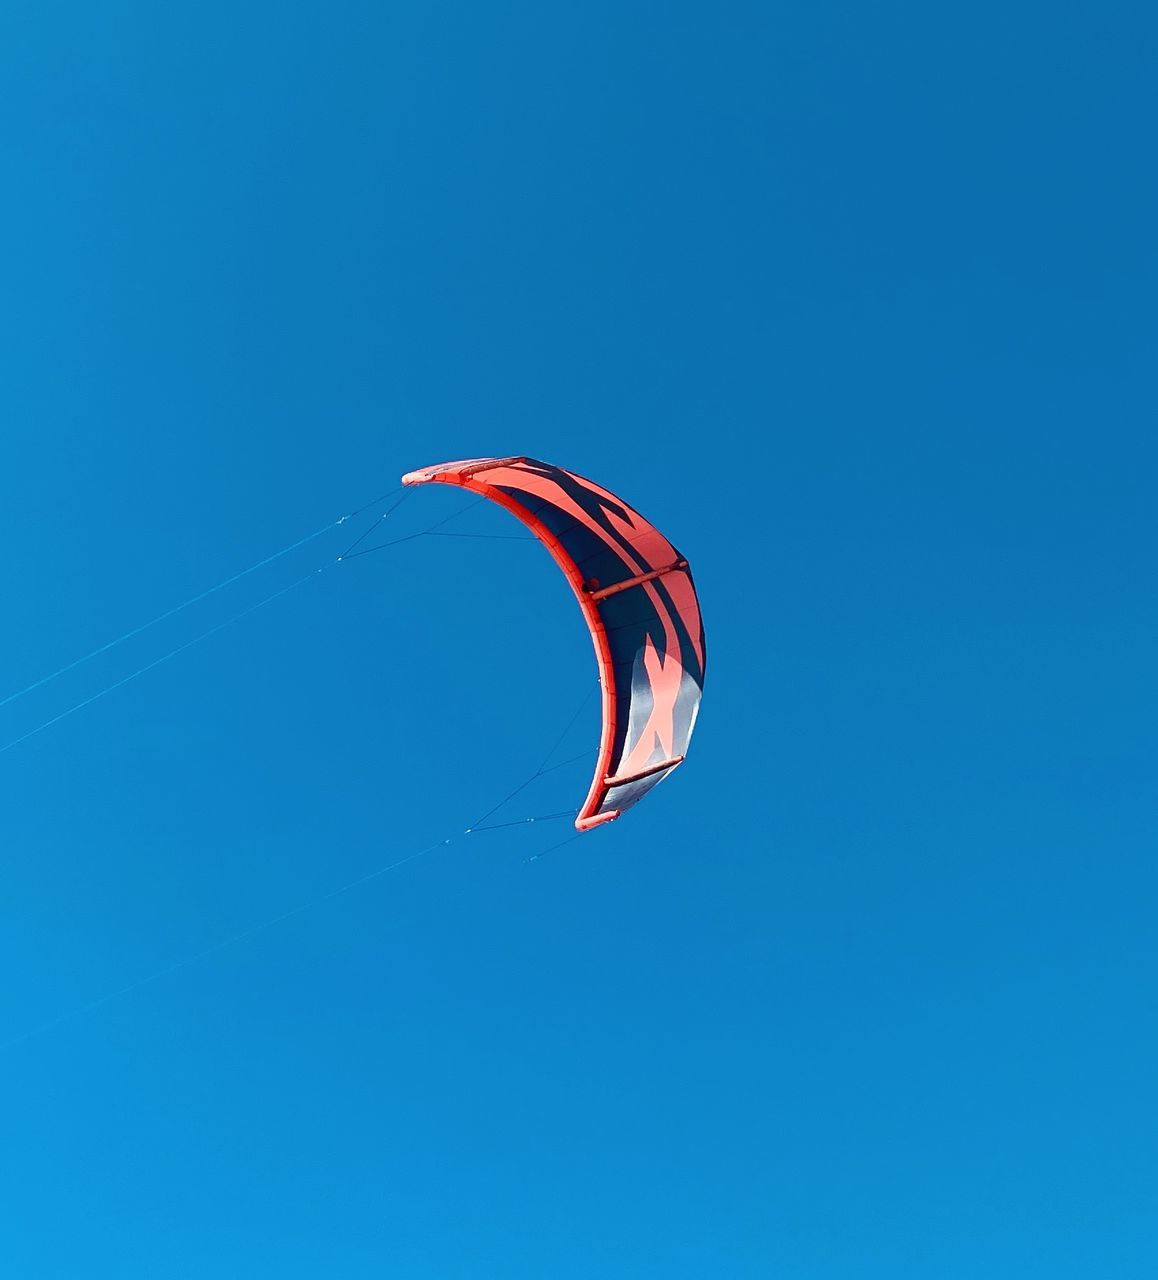 blue, windsports, sports, sky, flying, clear sky, mid-air, toy, nature, low angle view, paragliding, parachute, extreme sports, adventure, leisure activity, copy space, day, kite sports, joy, motion, sunny, sport kite, environment, outdoors, kite - toy, wind, transportation, gliding, multi colored, no people, exhilaration